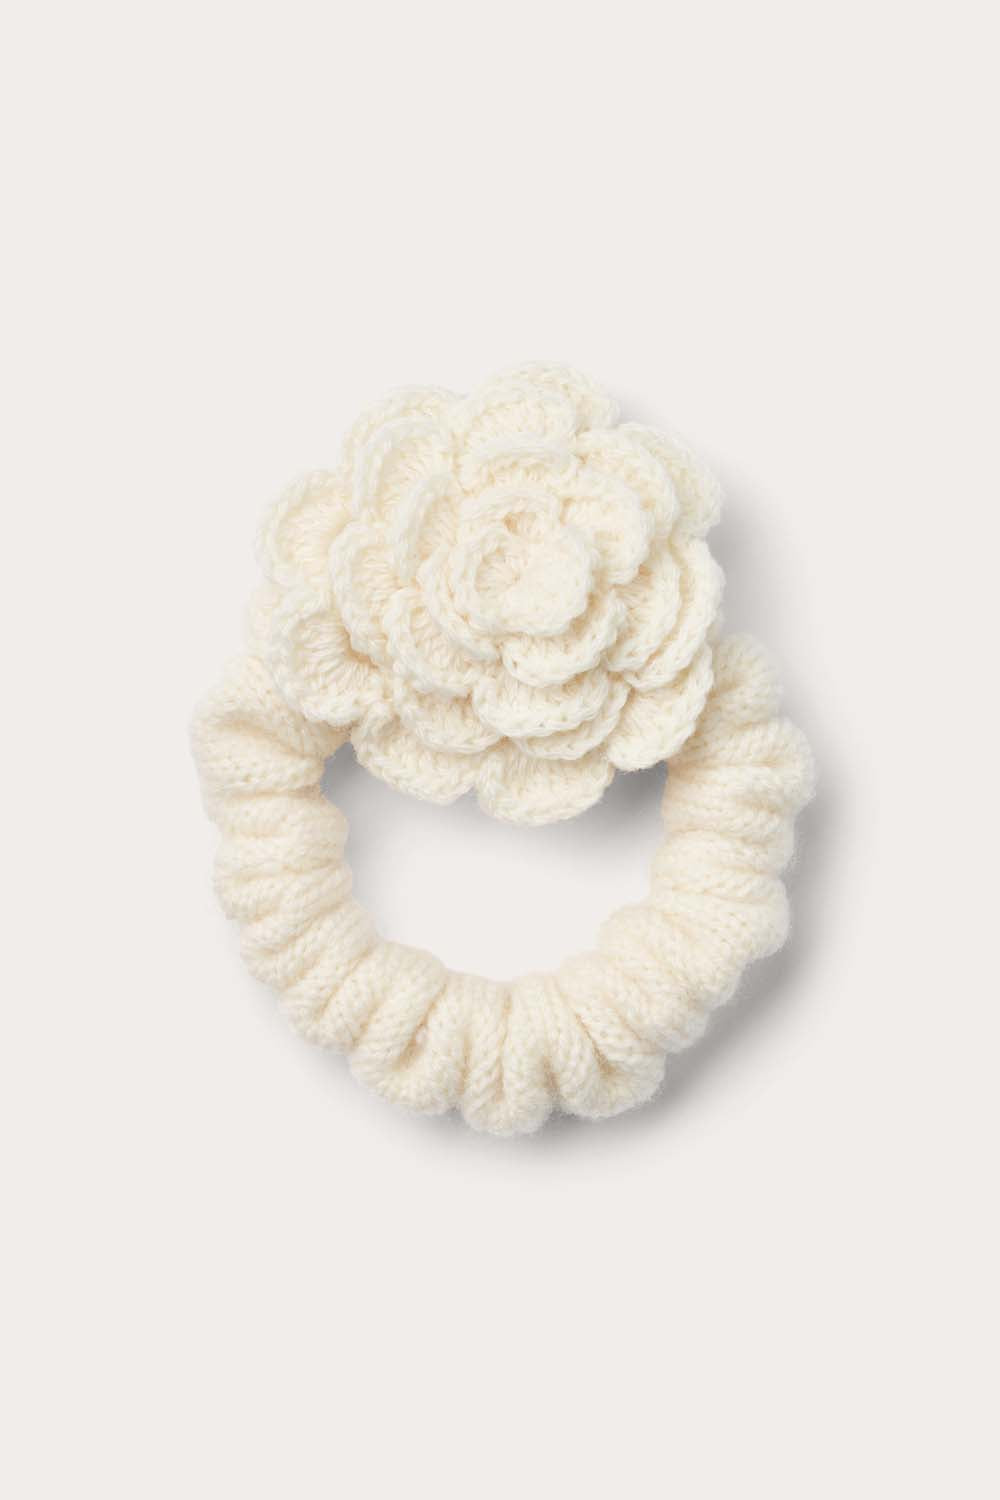 O'TAY Small Scrunchie w/Flower Hair accessories Off White